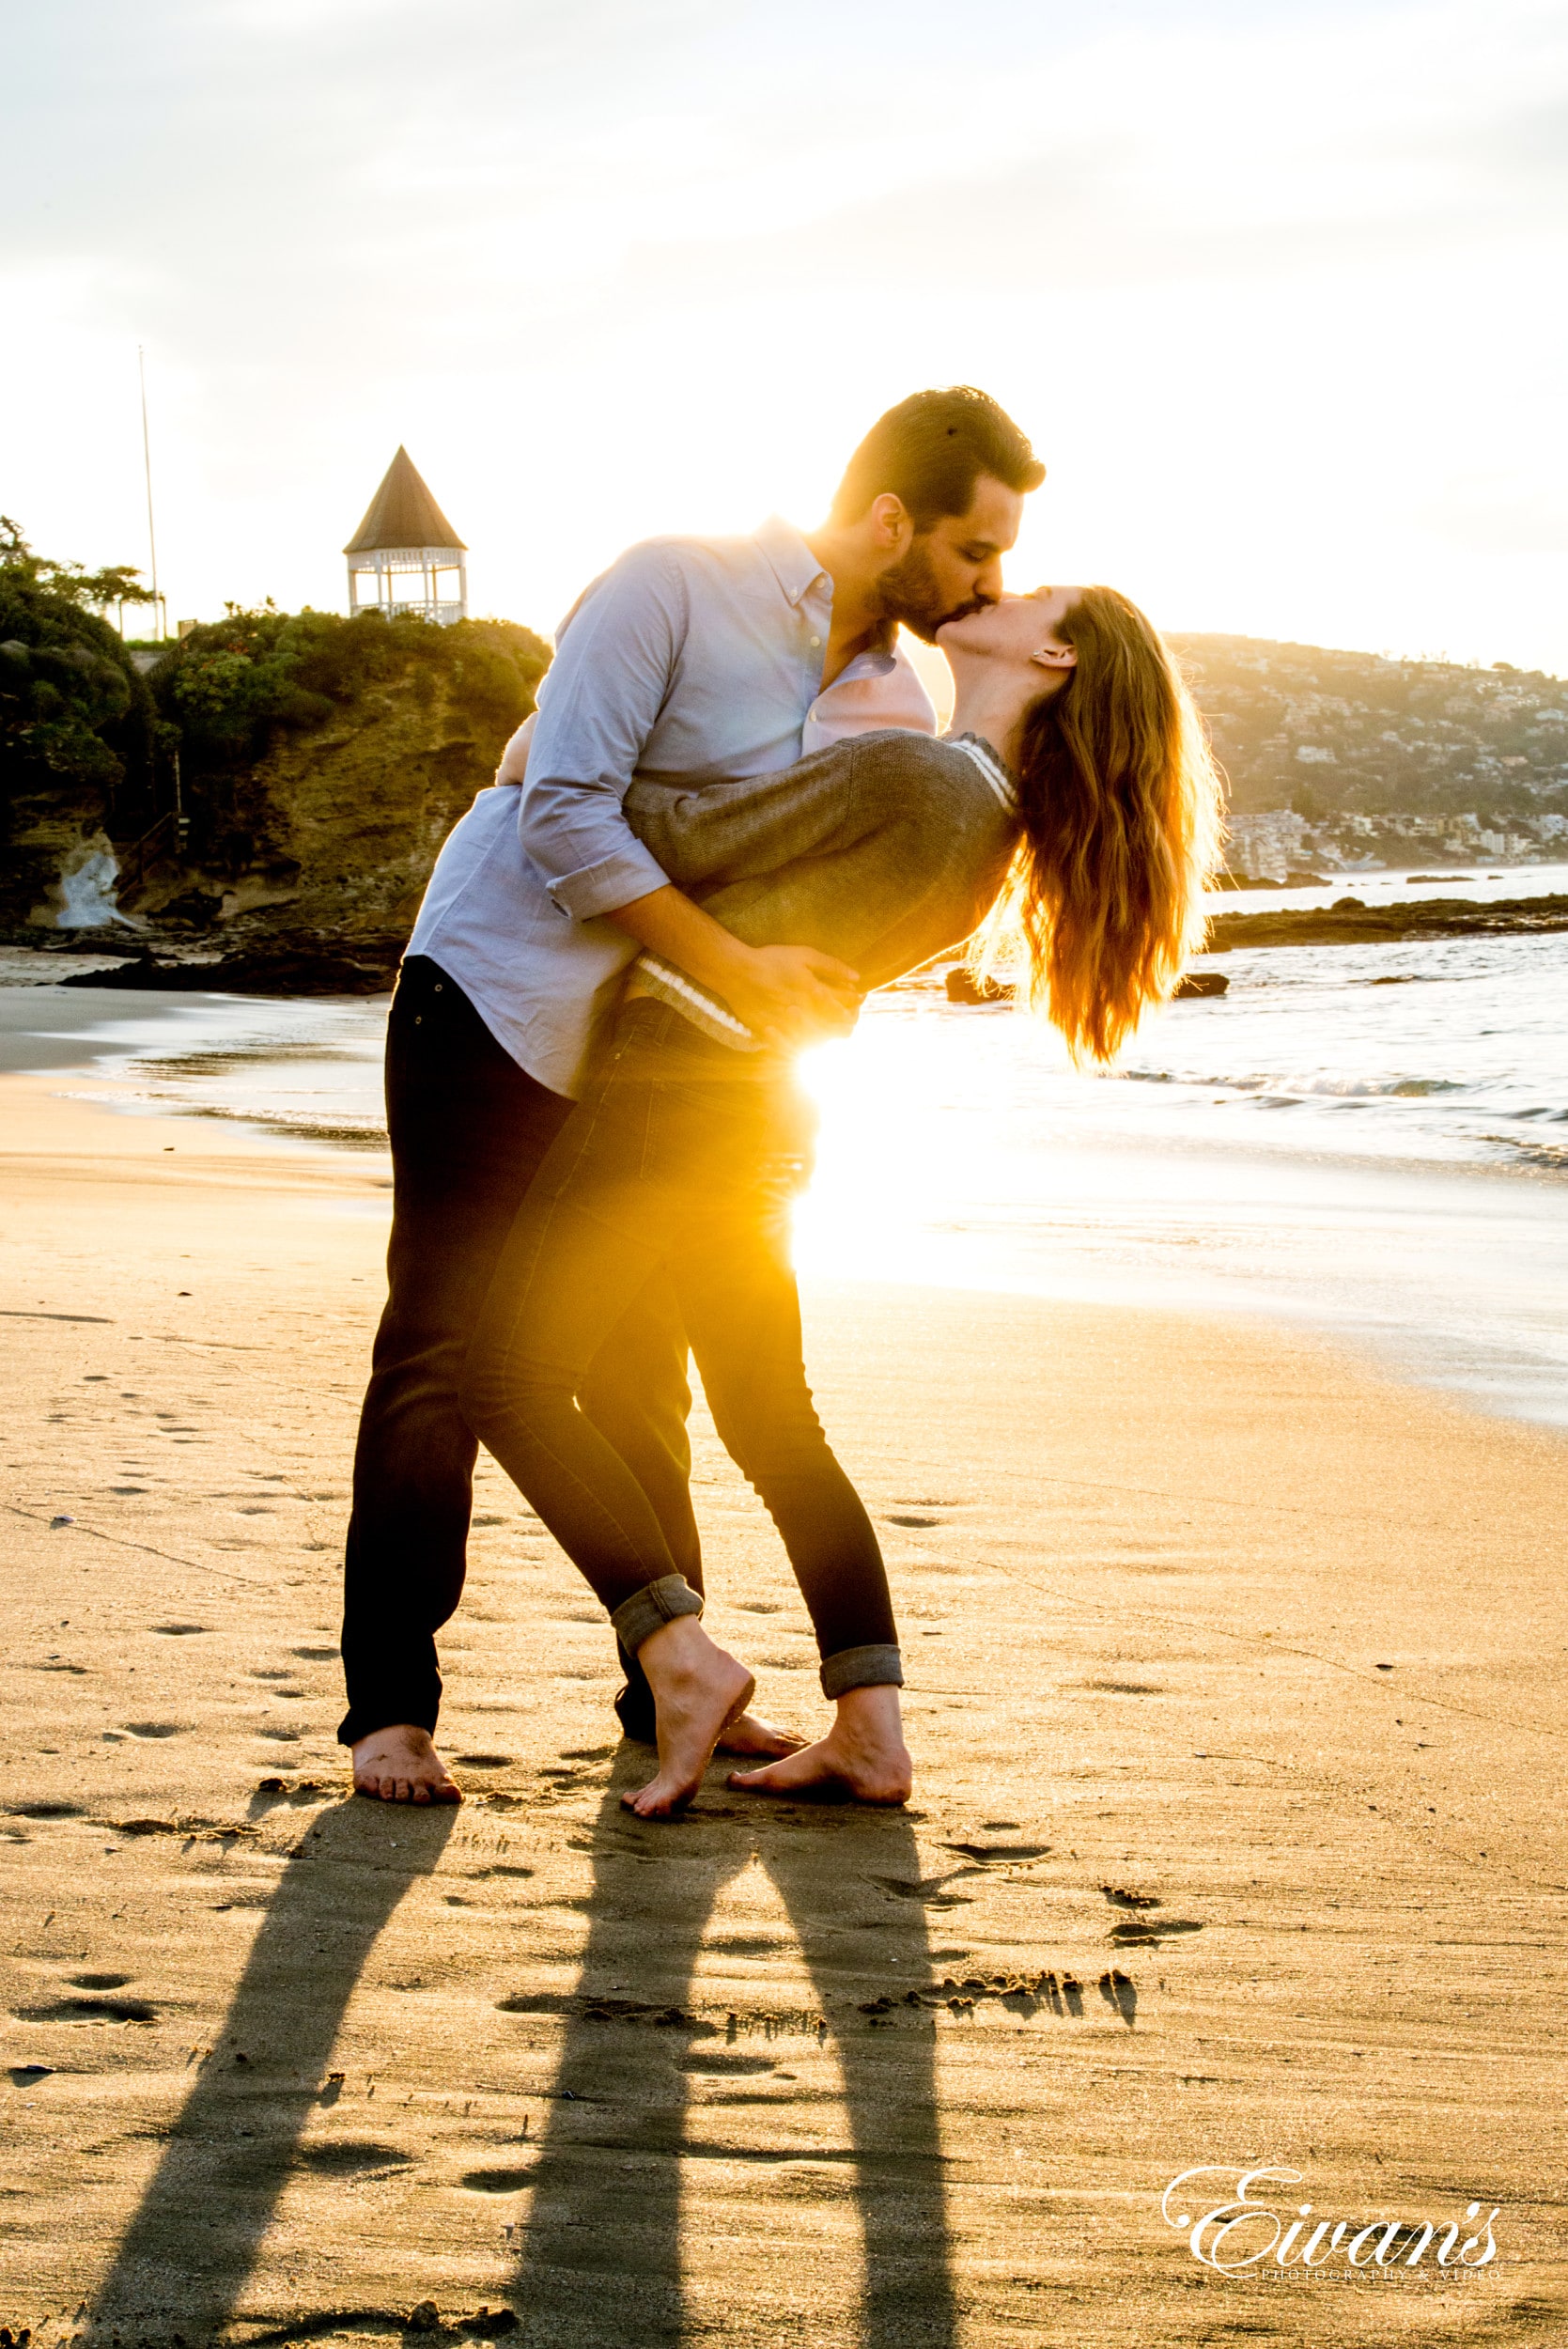 man and woman kissing on beach during daytime